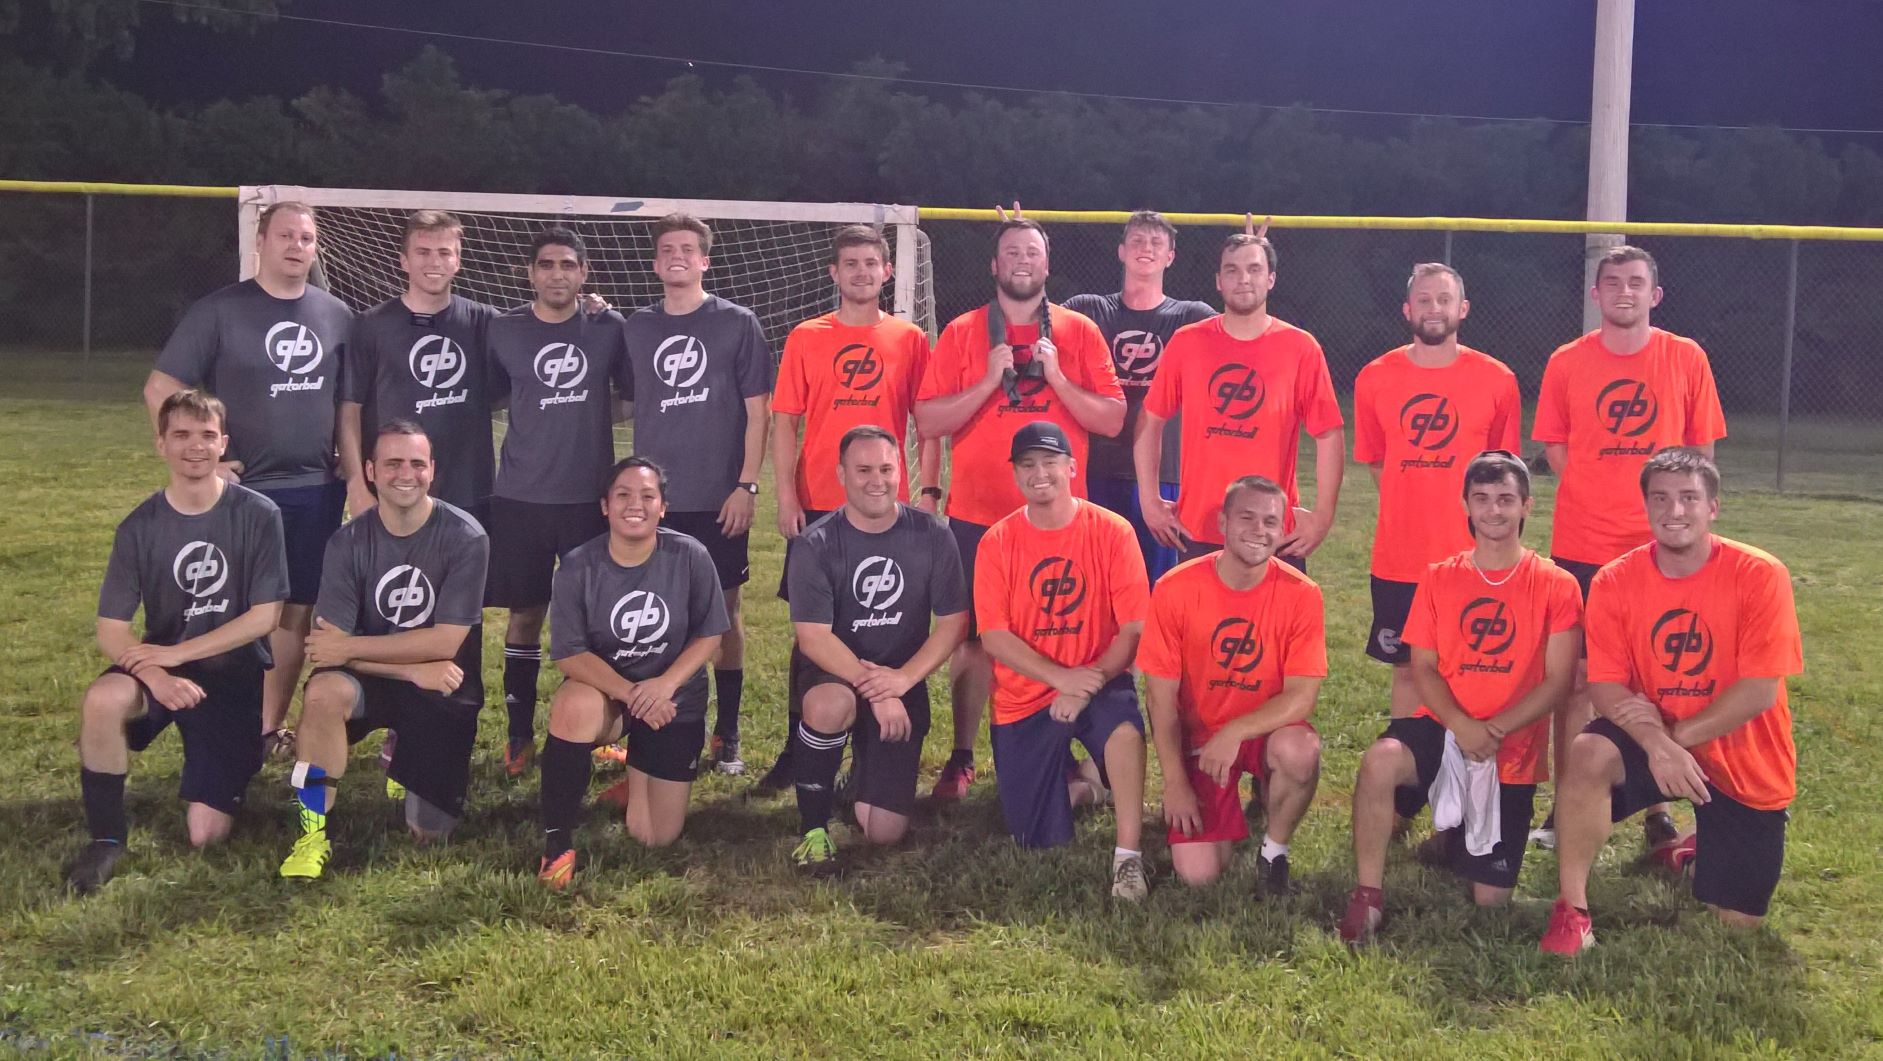 post-game photo of a group of young men and women who participated in the 2019 spring season